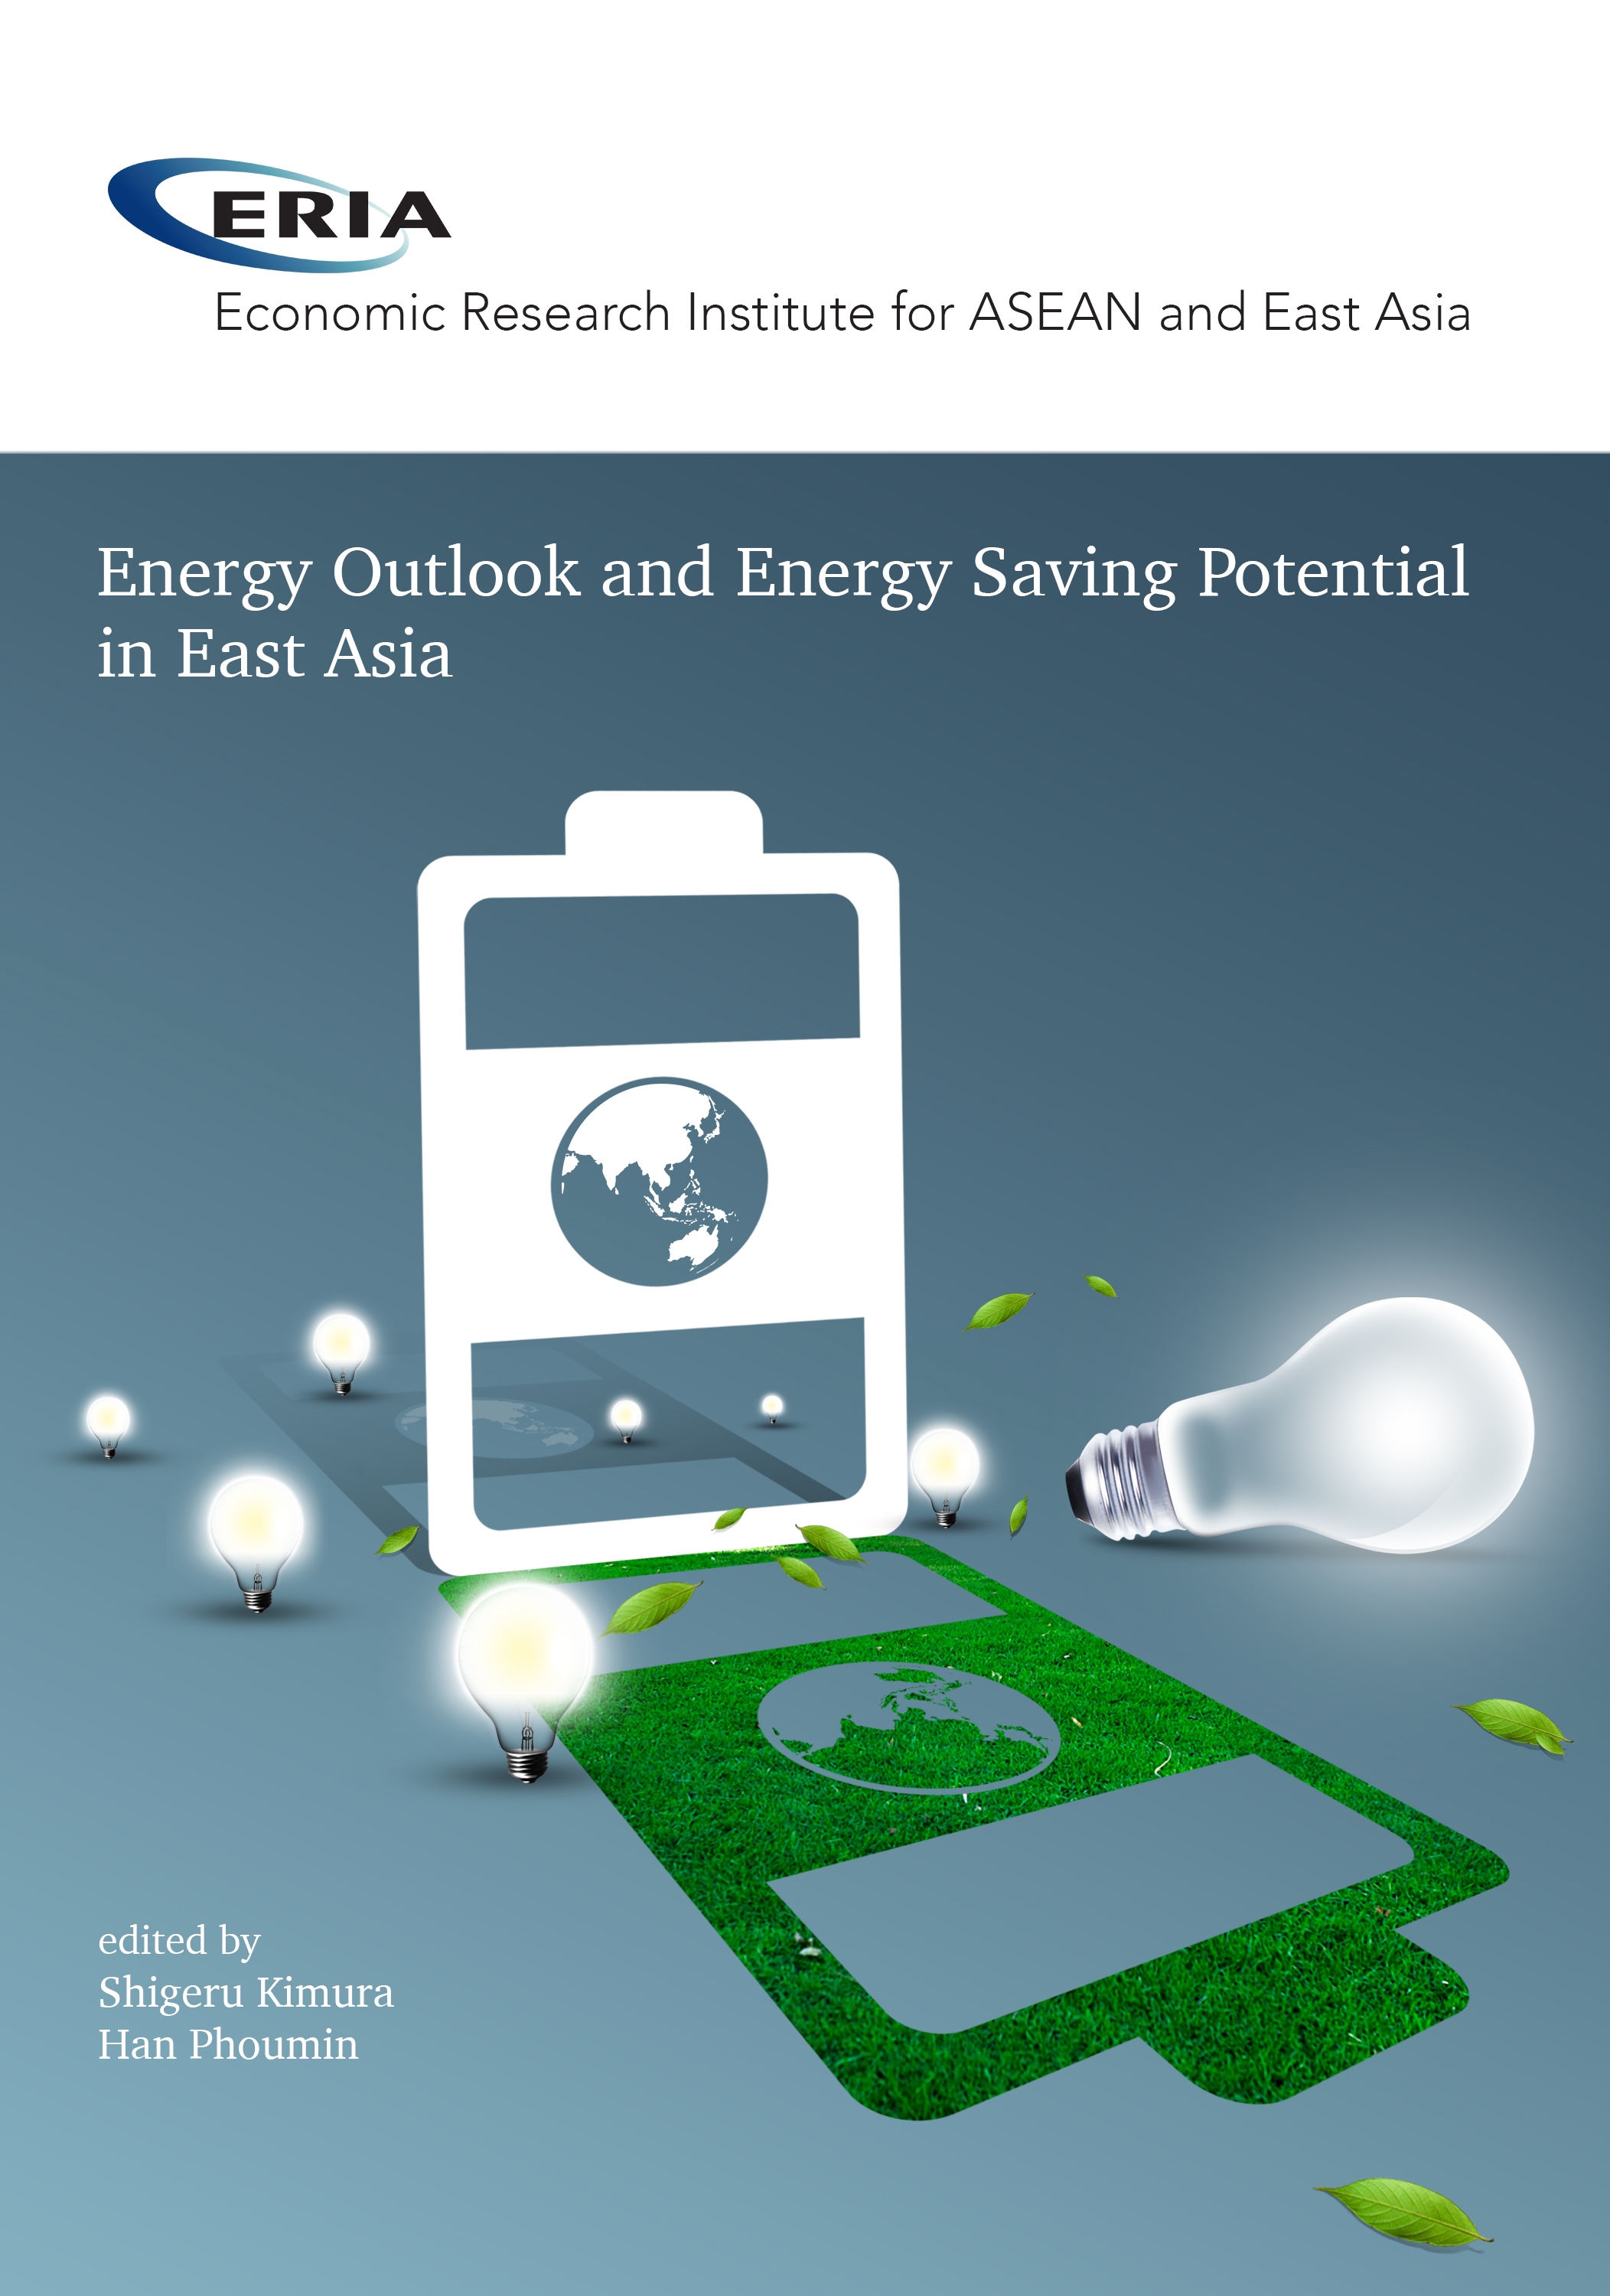 Energy Outlook and Energy Saving Potential in East Asia 2015